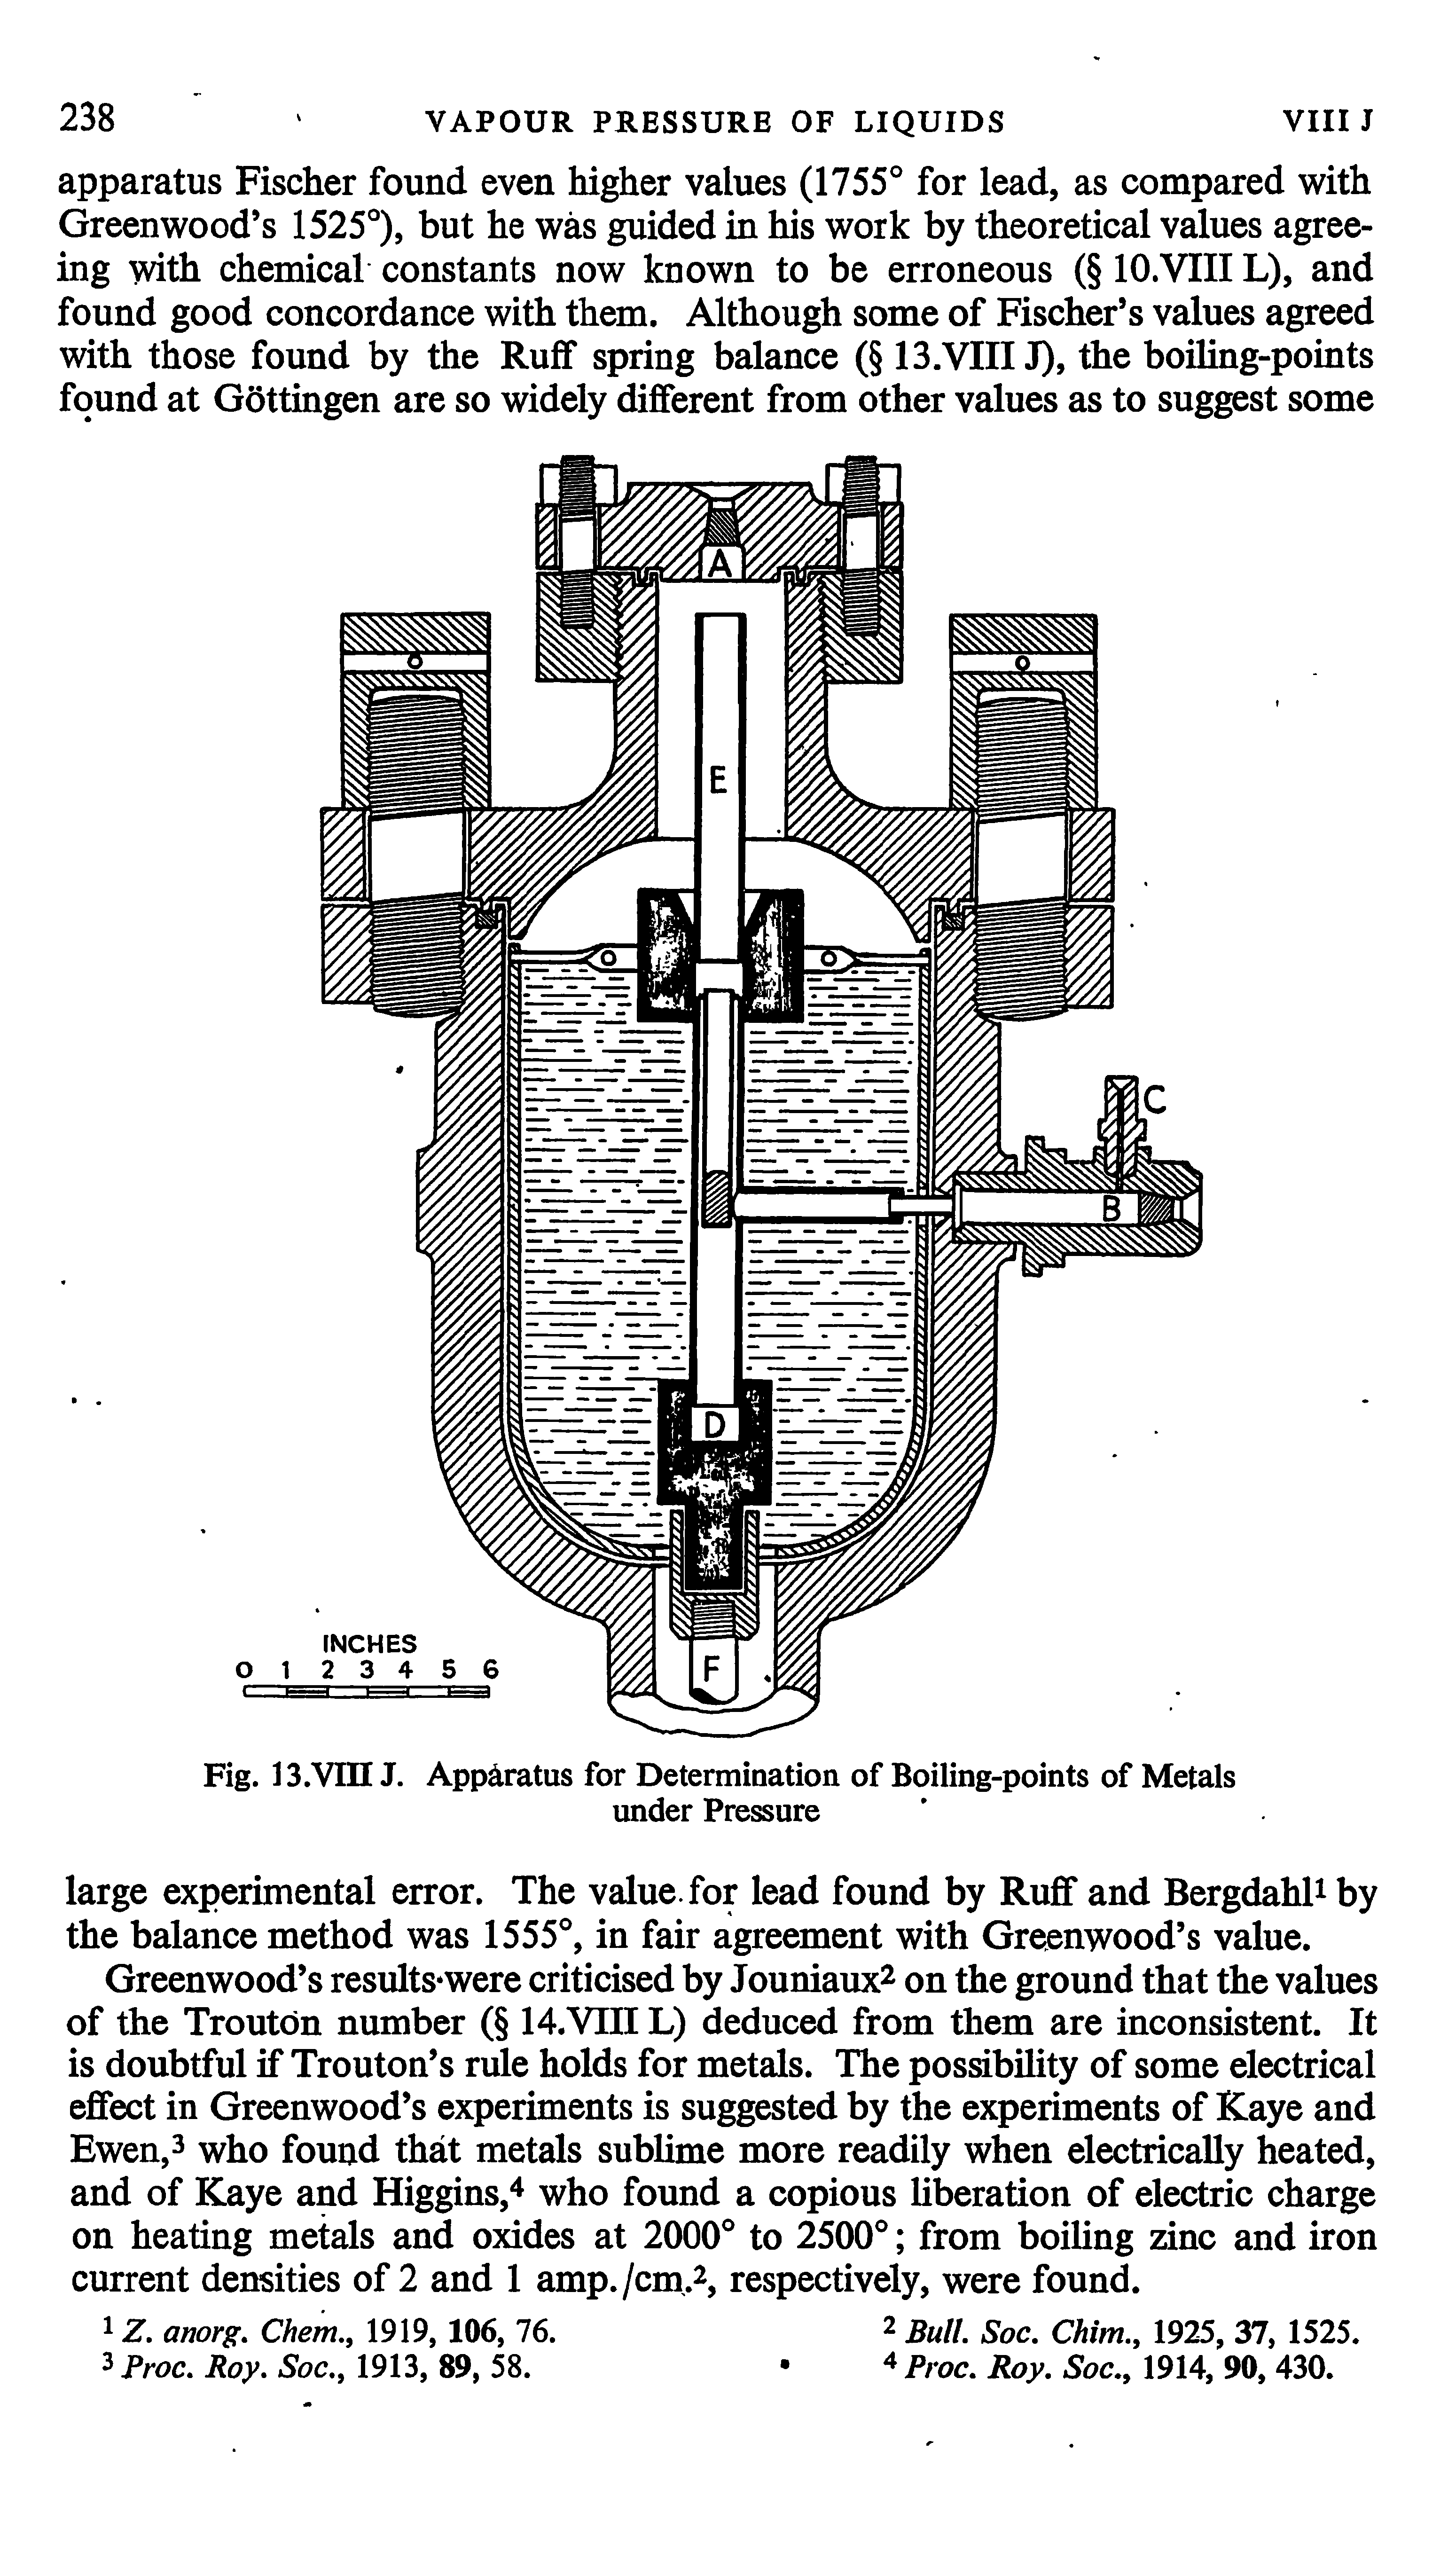 Fig. 13.Vin J. Apparatus for Determination of Boiling-points of Metals under Pressure...